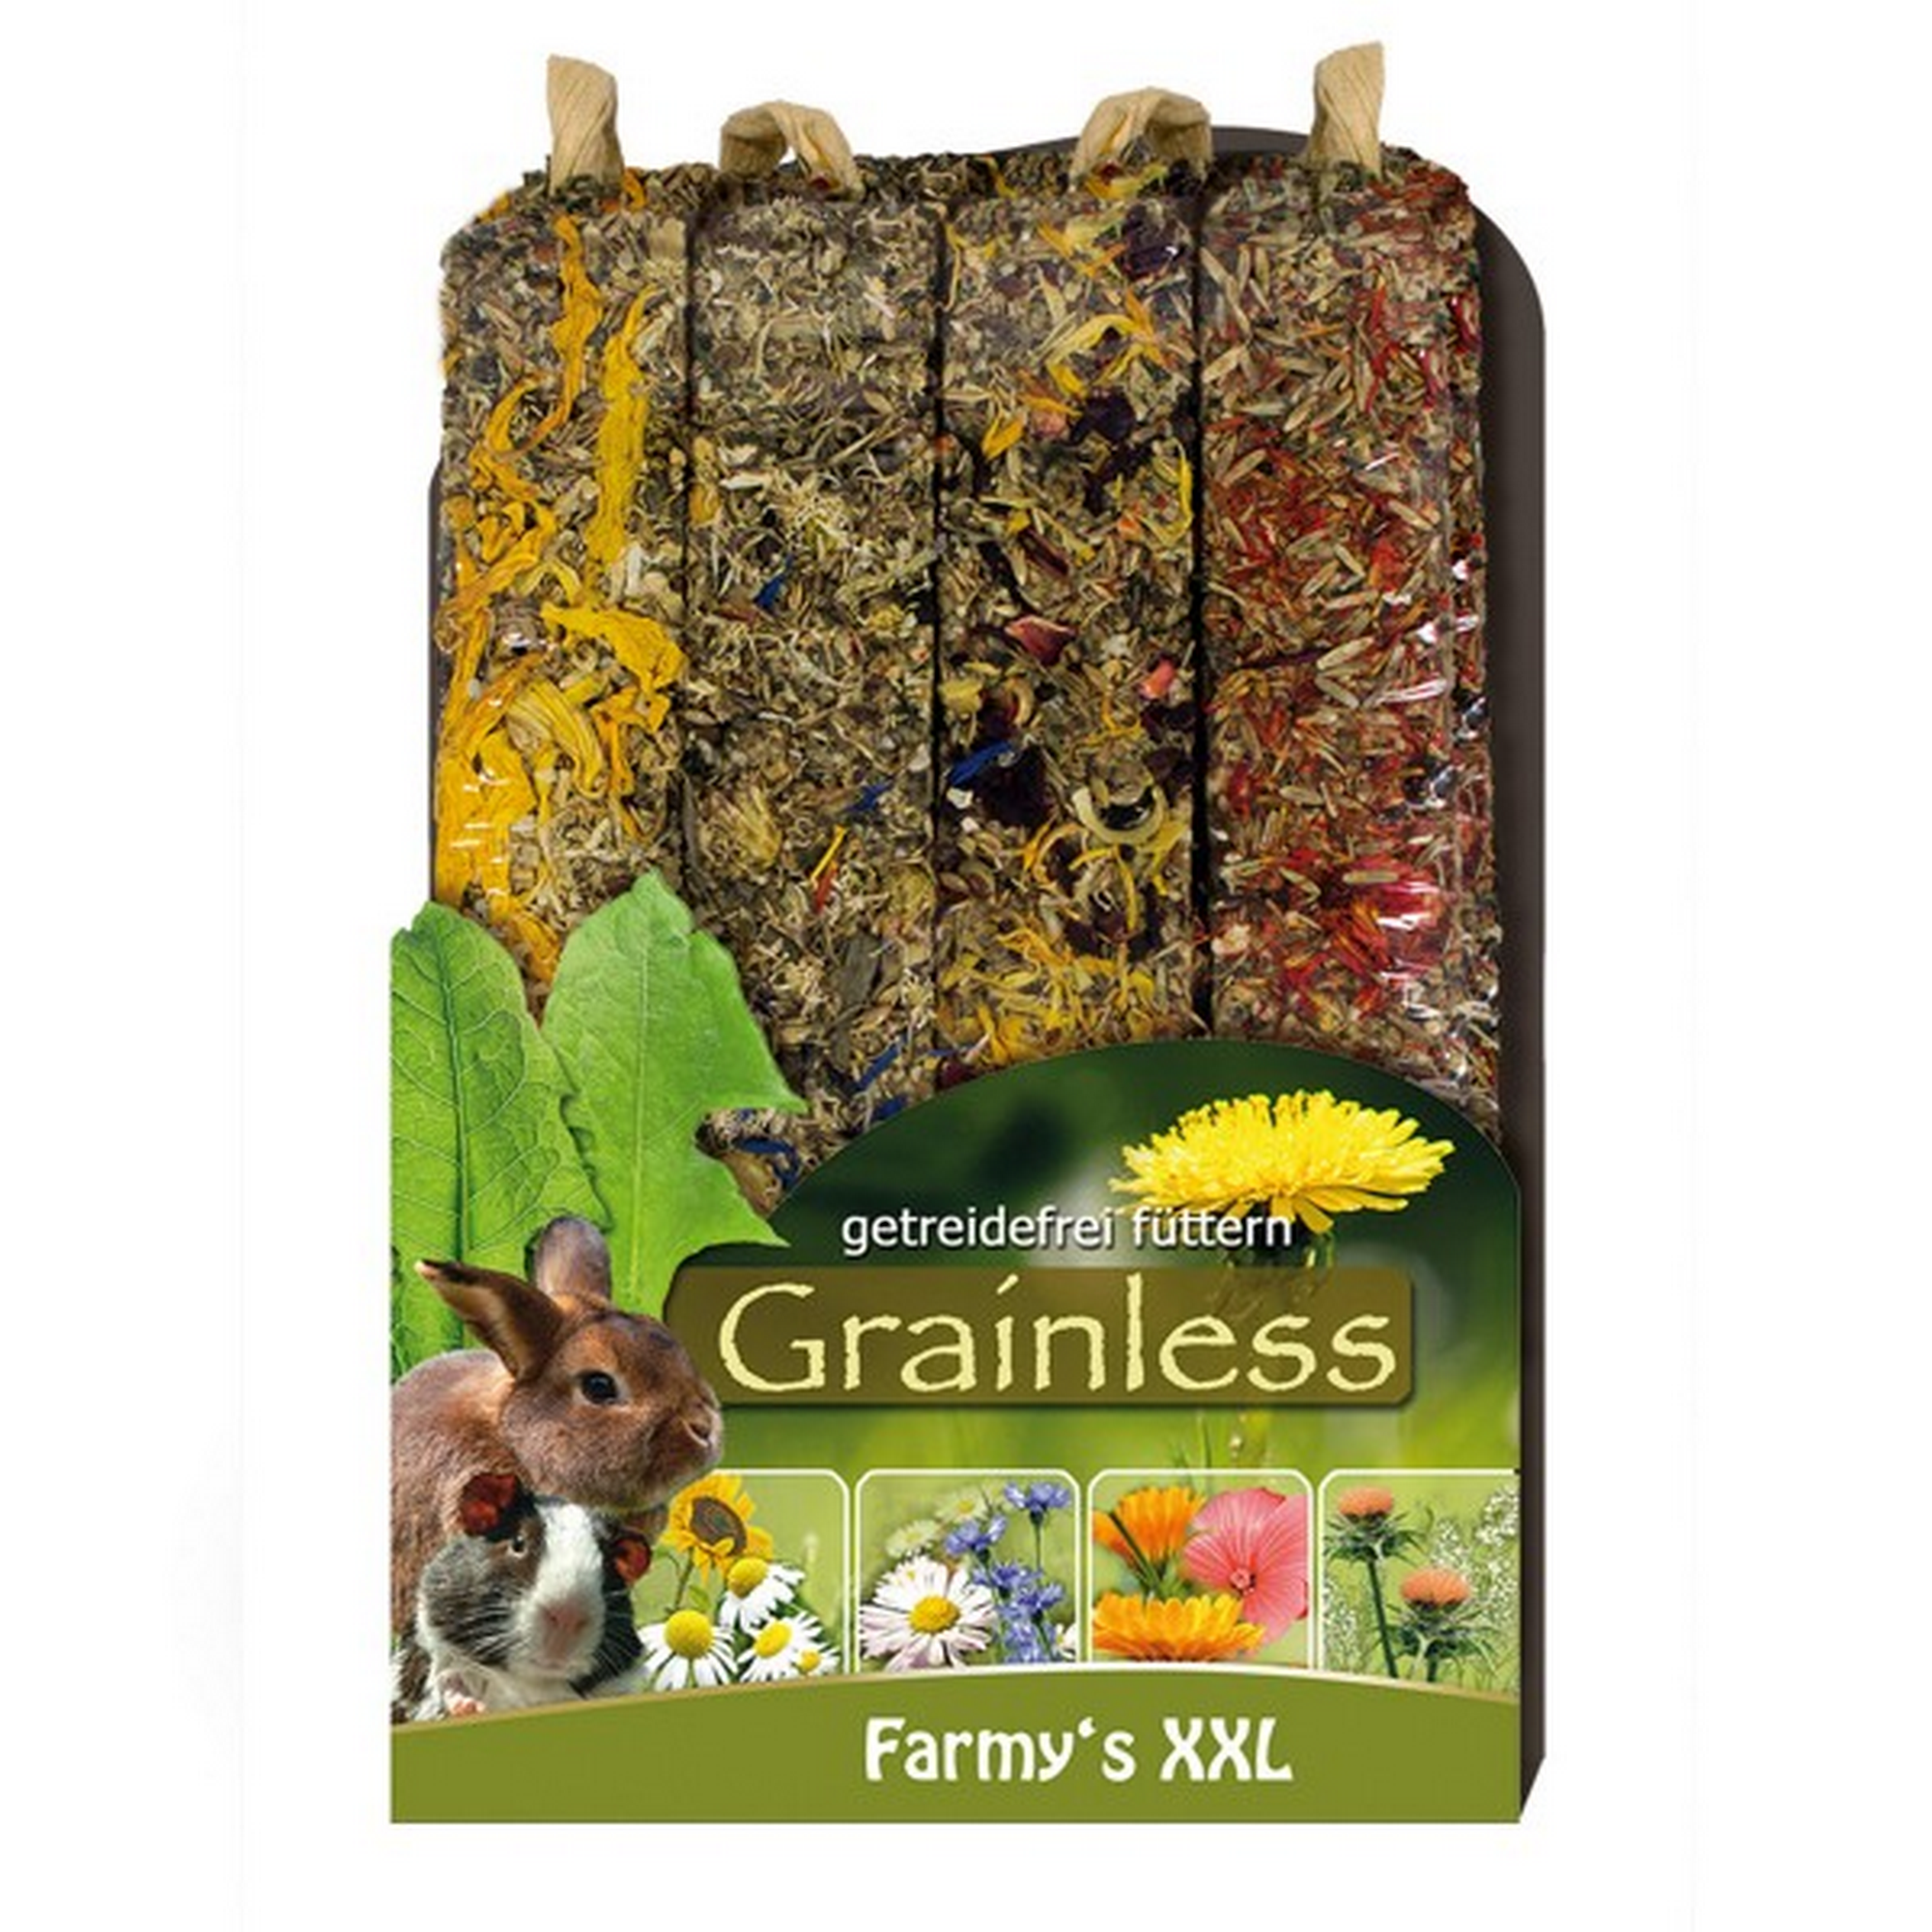 Nagersnack 'Grainless Farmys' XXL 4er-Pack 450 g + product picture